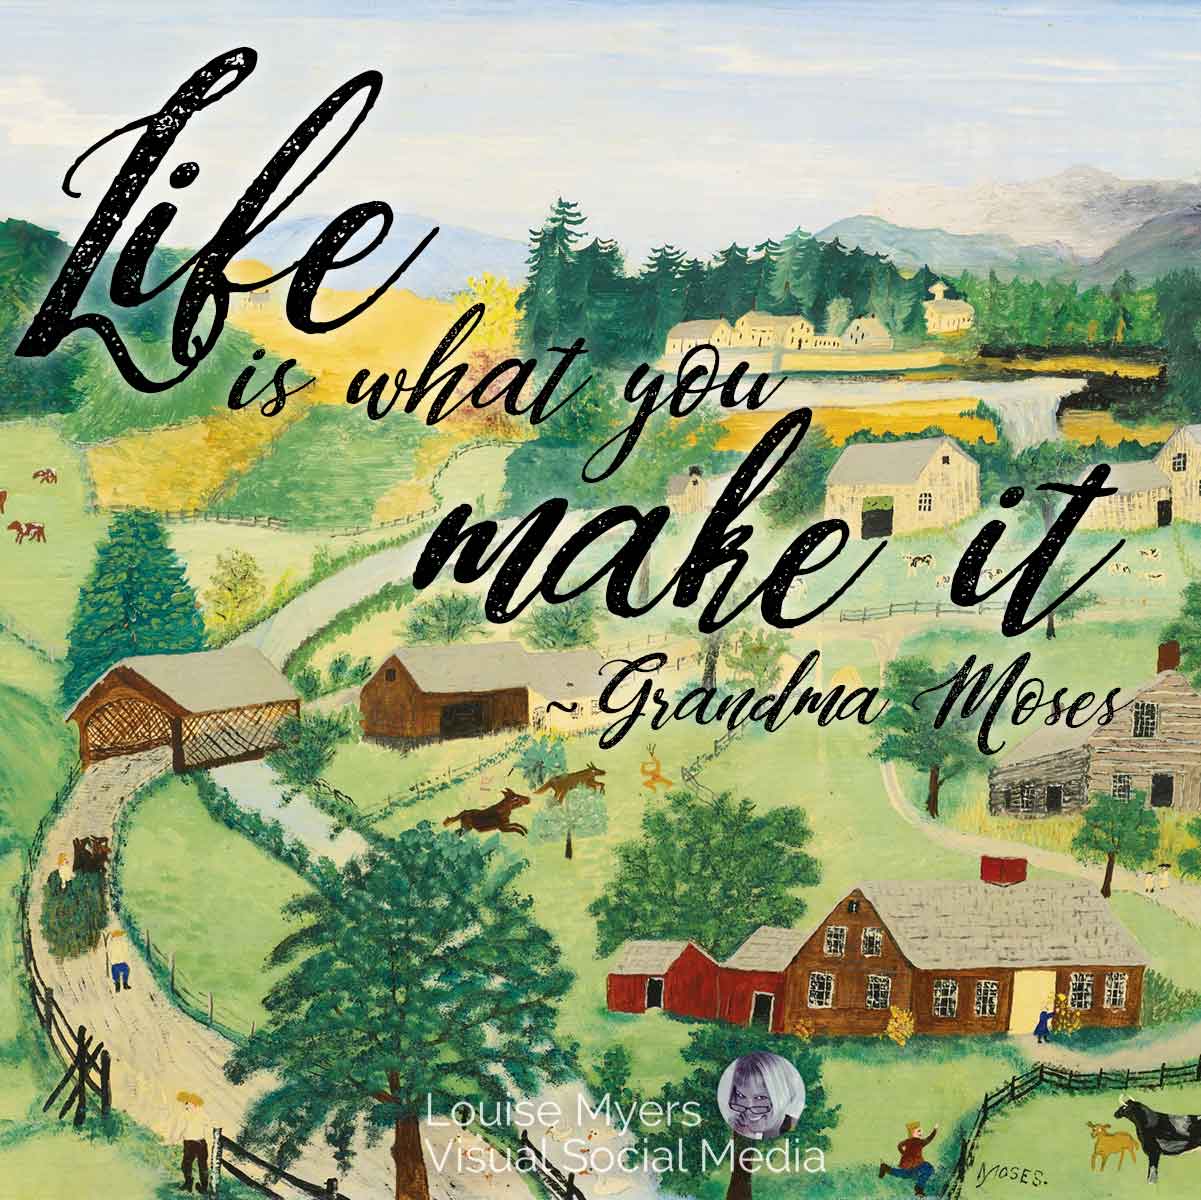 grandma moses folk art with quote for american artist day.